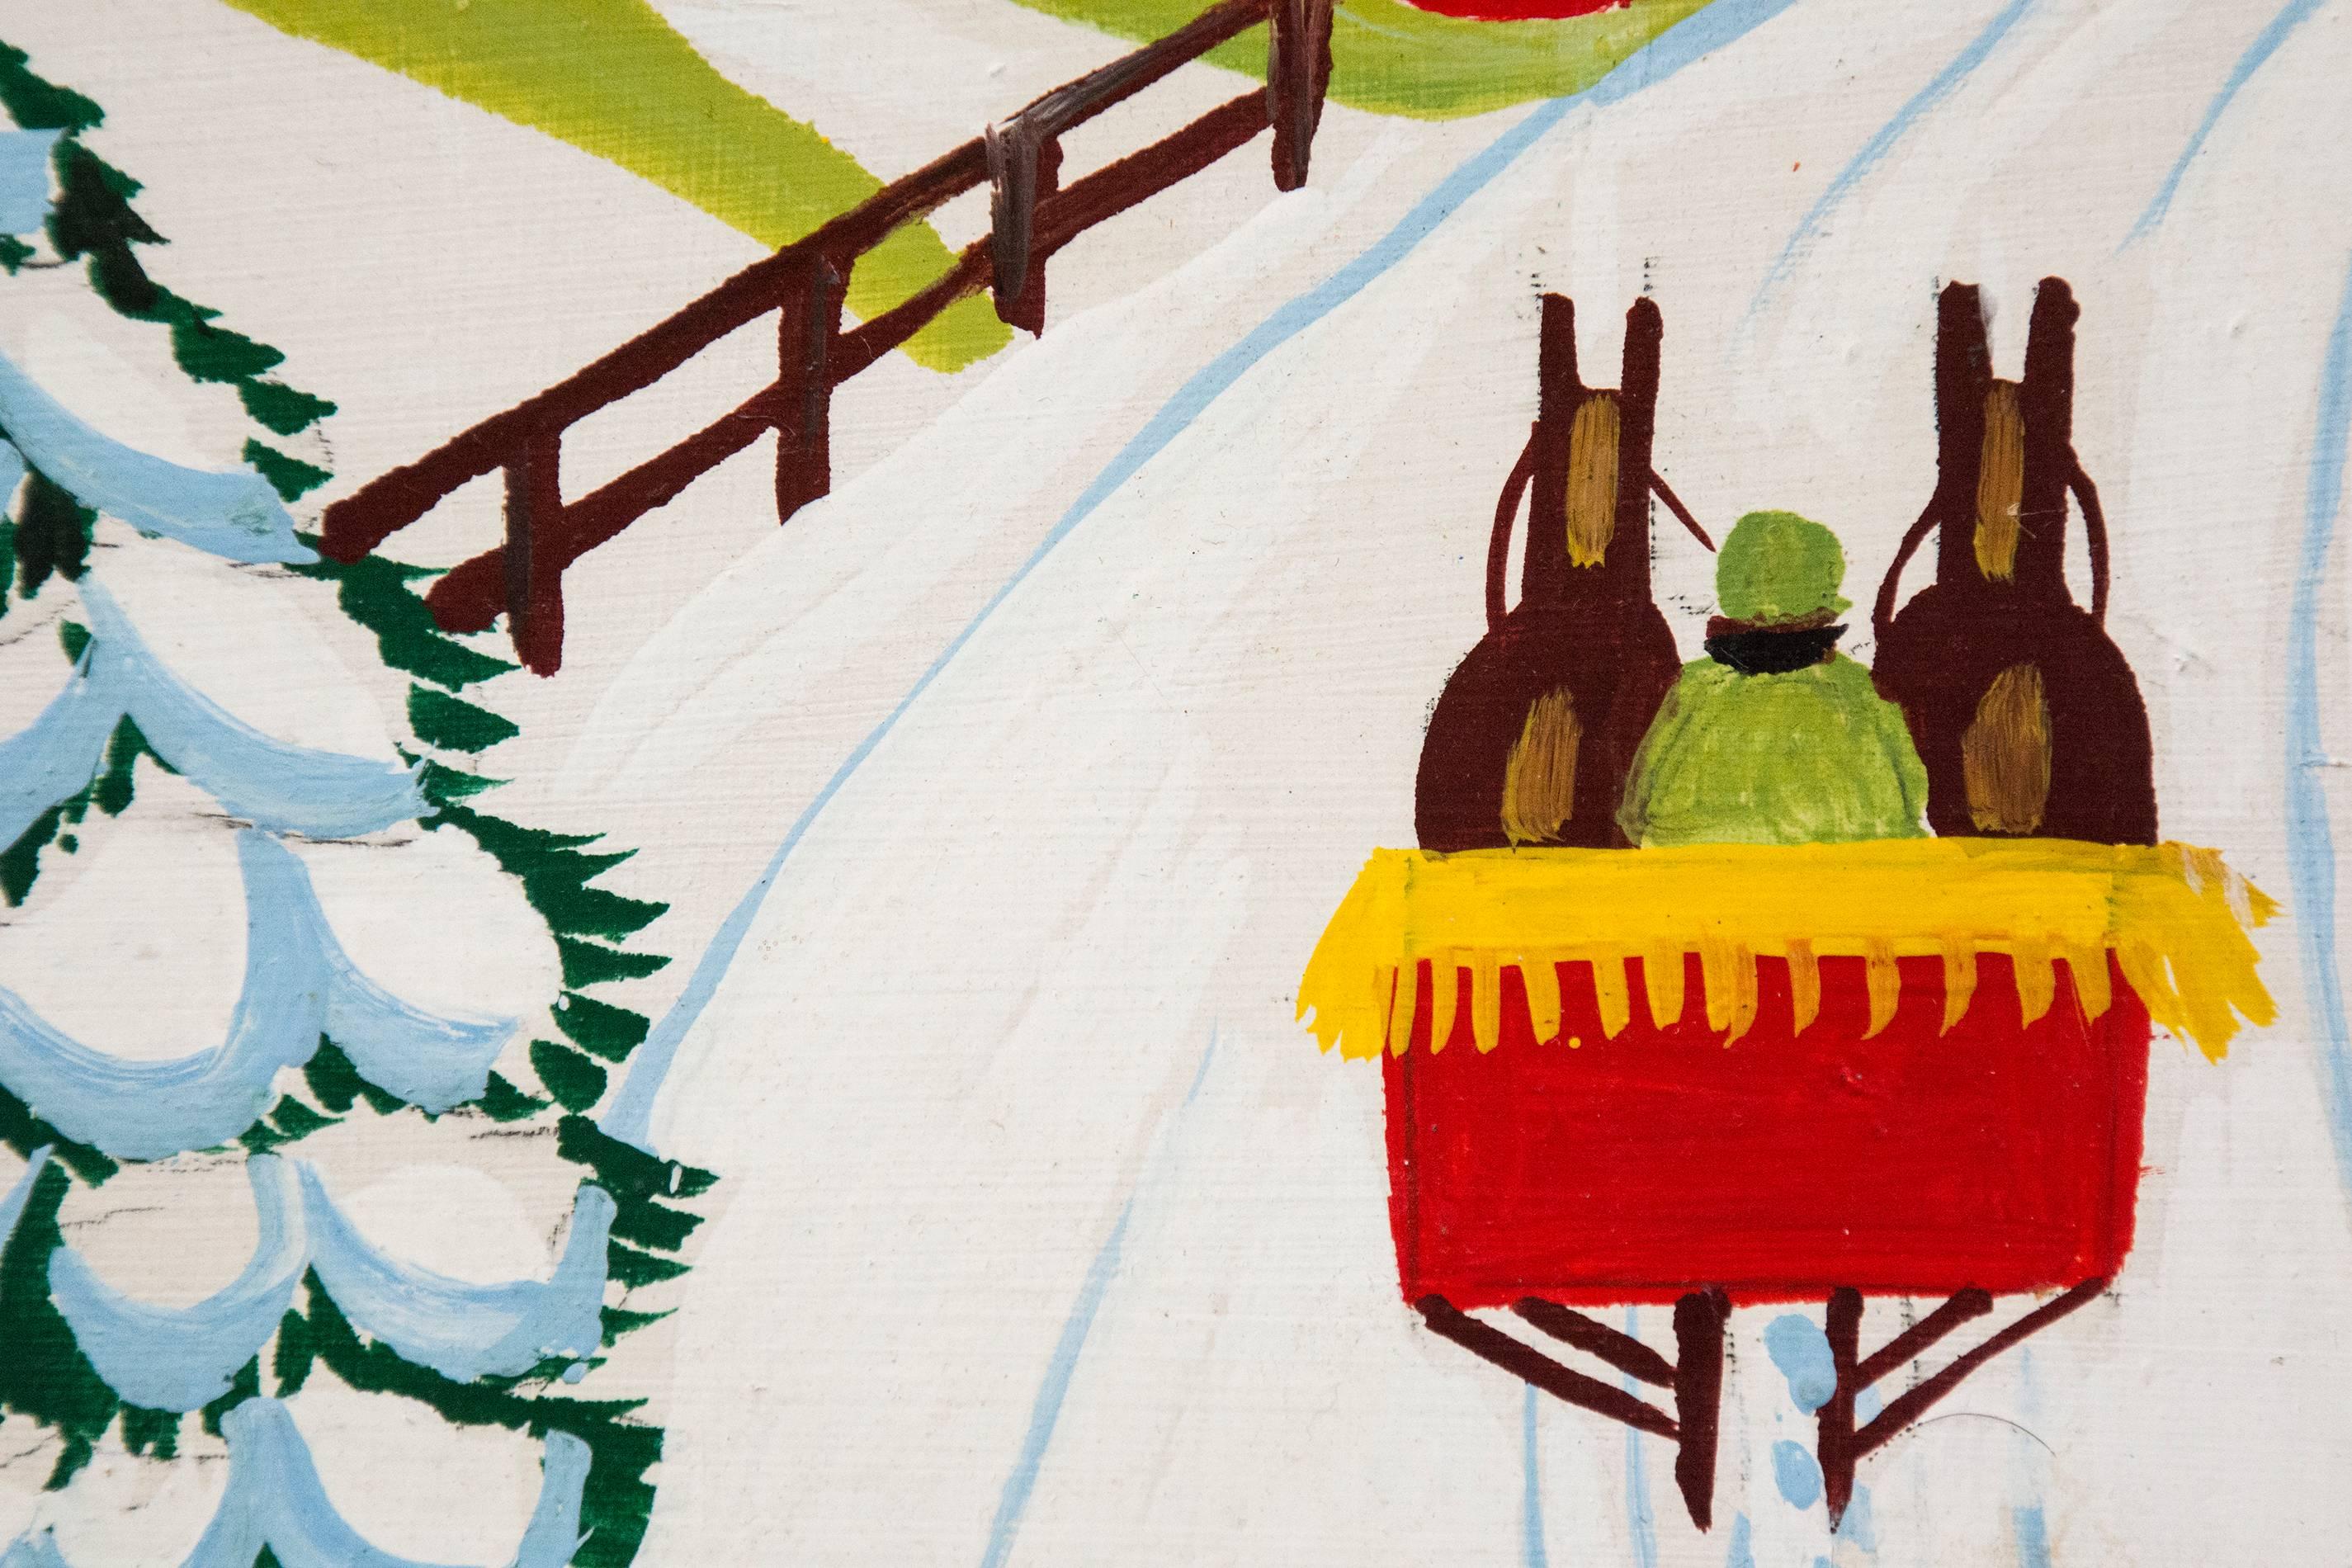 Sleigh Ride to Lake - Beige Figurative Painting by Maud Lewis